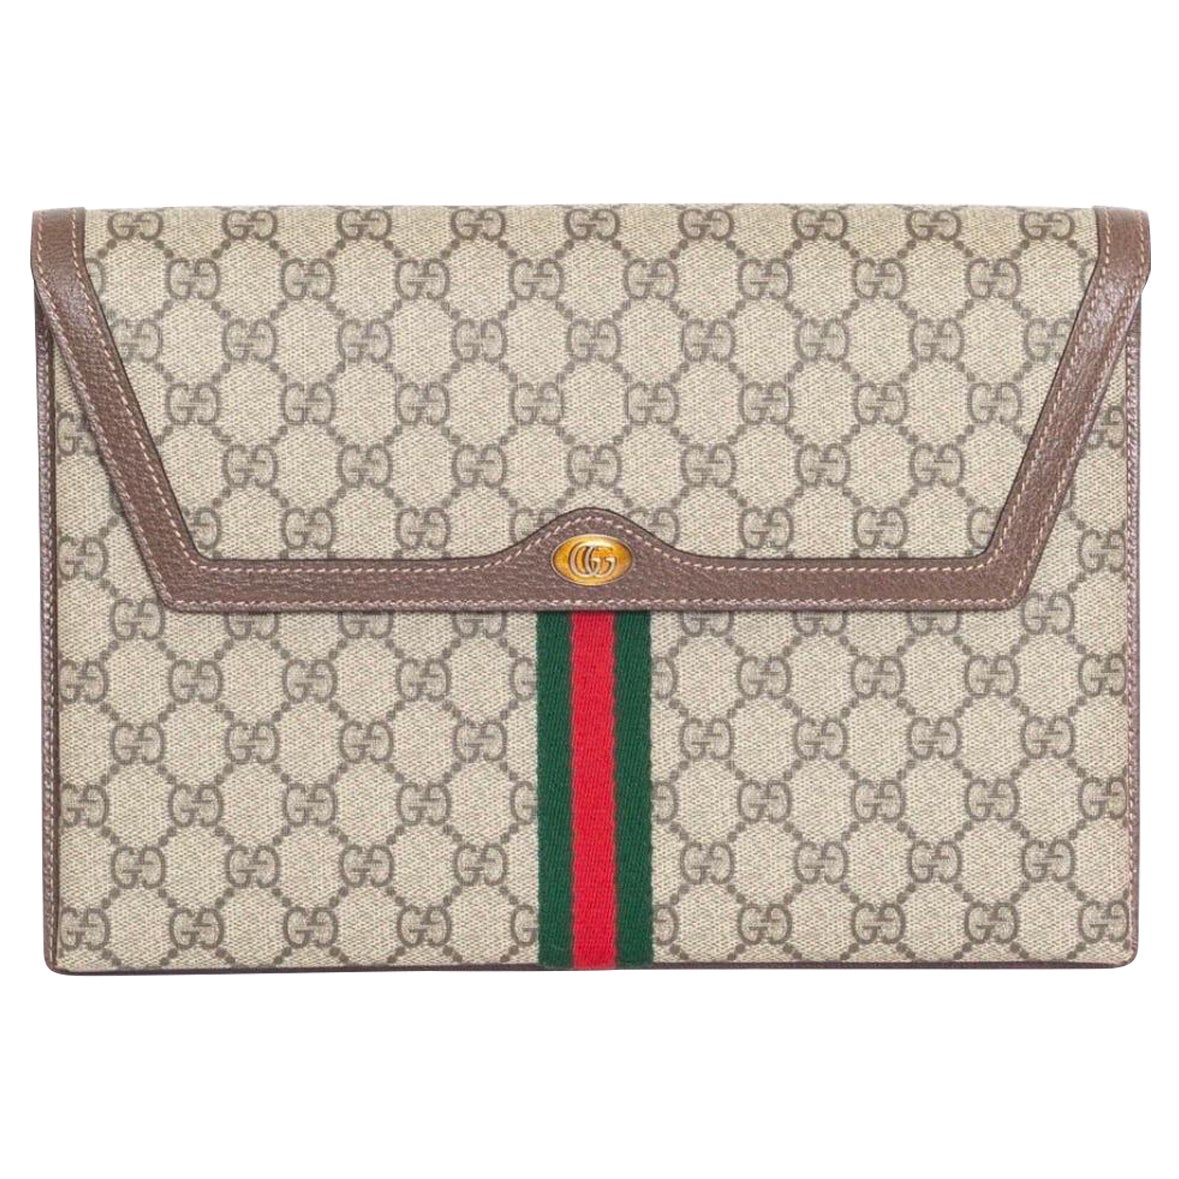 Gucci 2020 GG Supreme "The Party" Ophidia Clutch (Jay-Z & Beyonce 